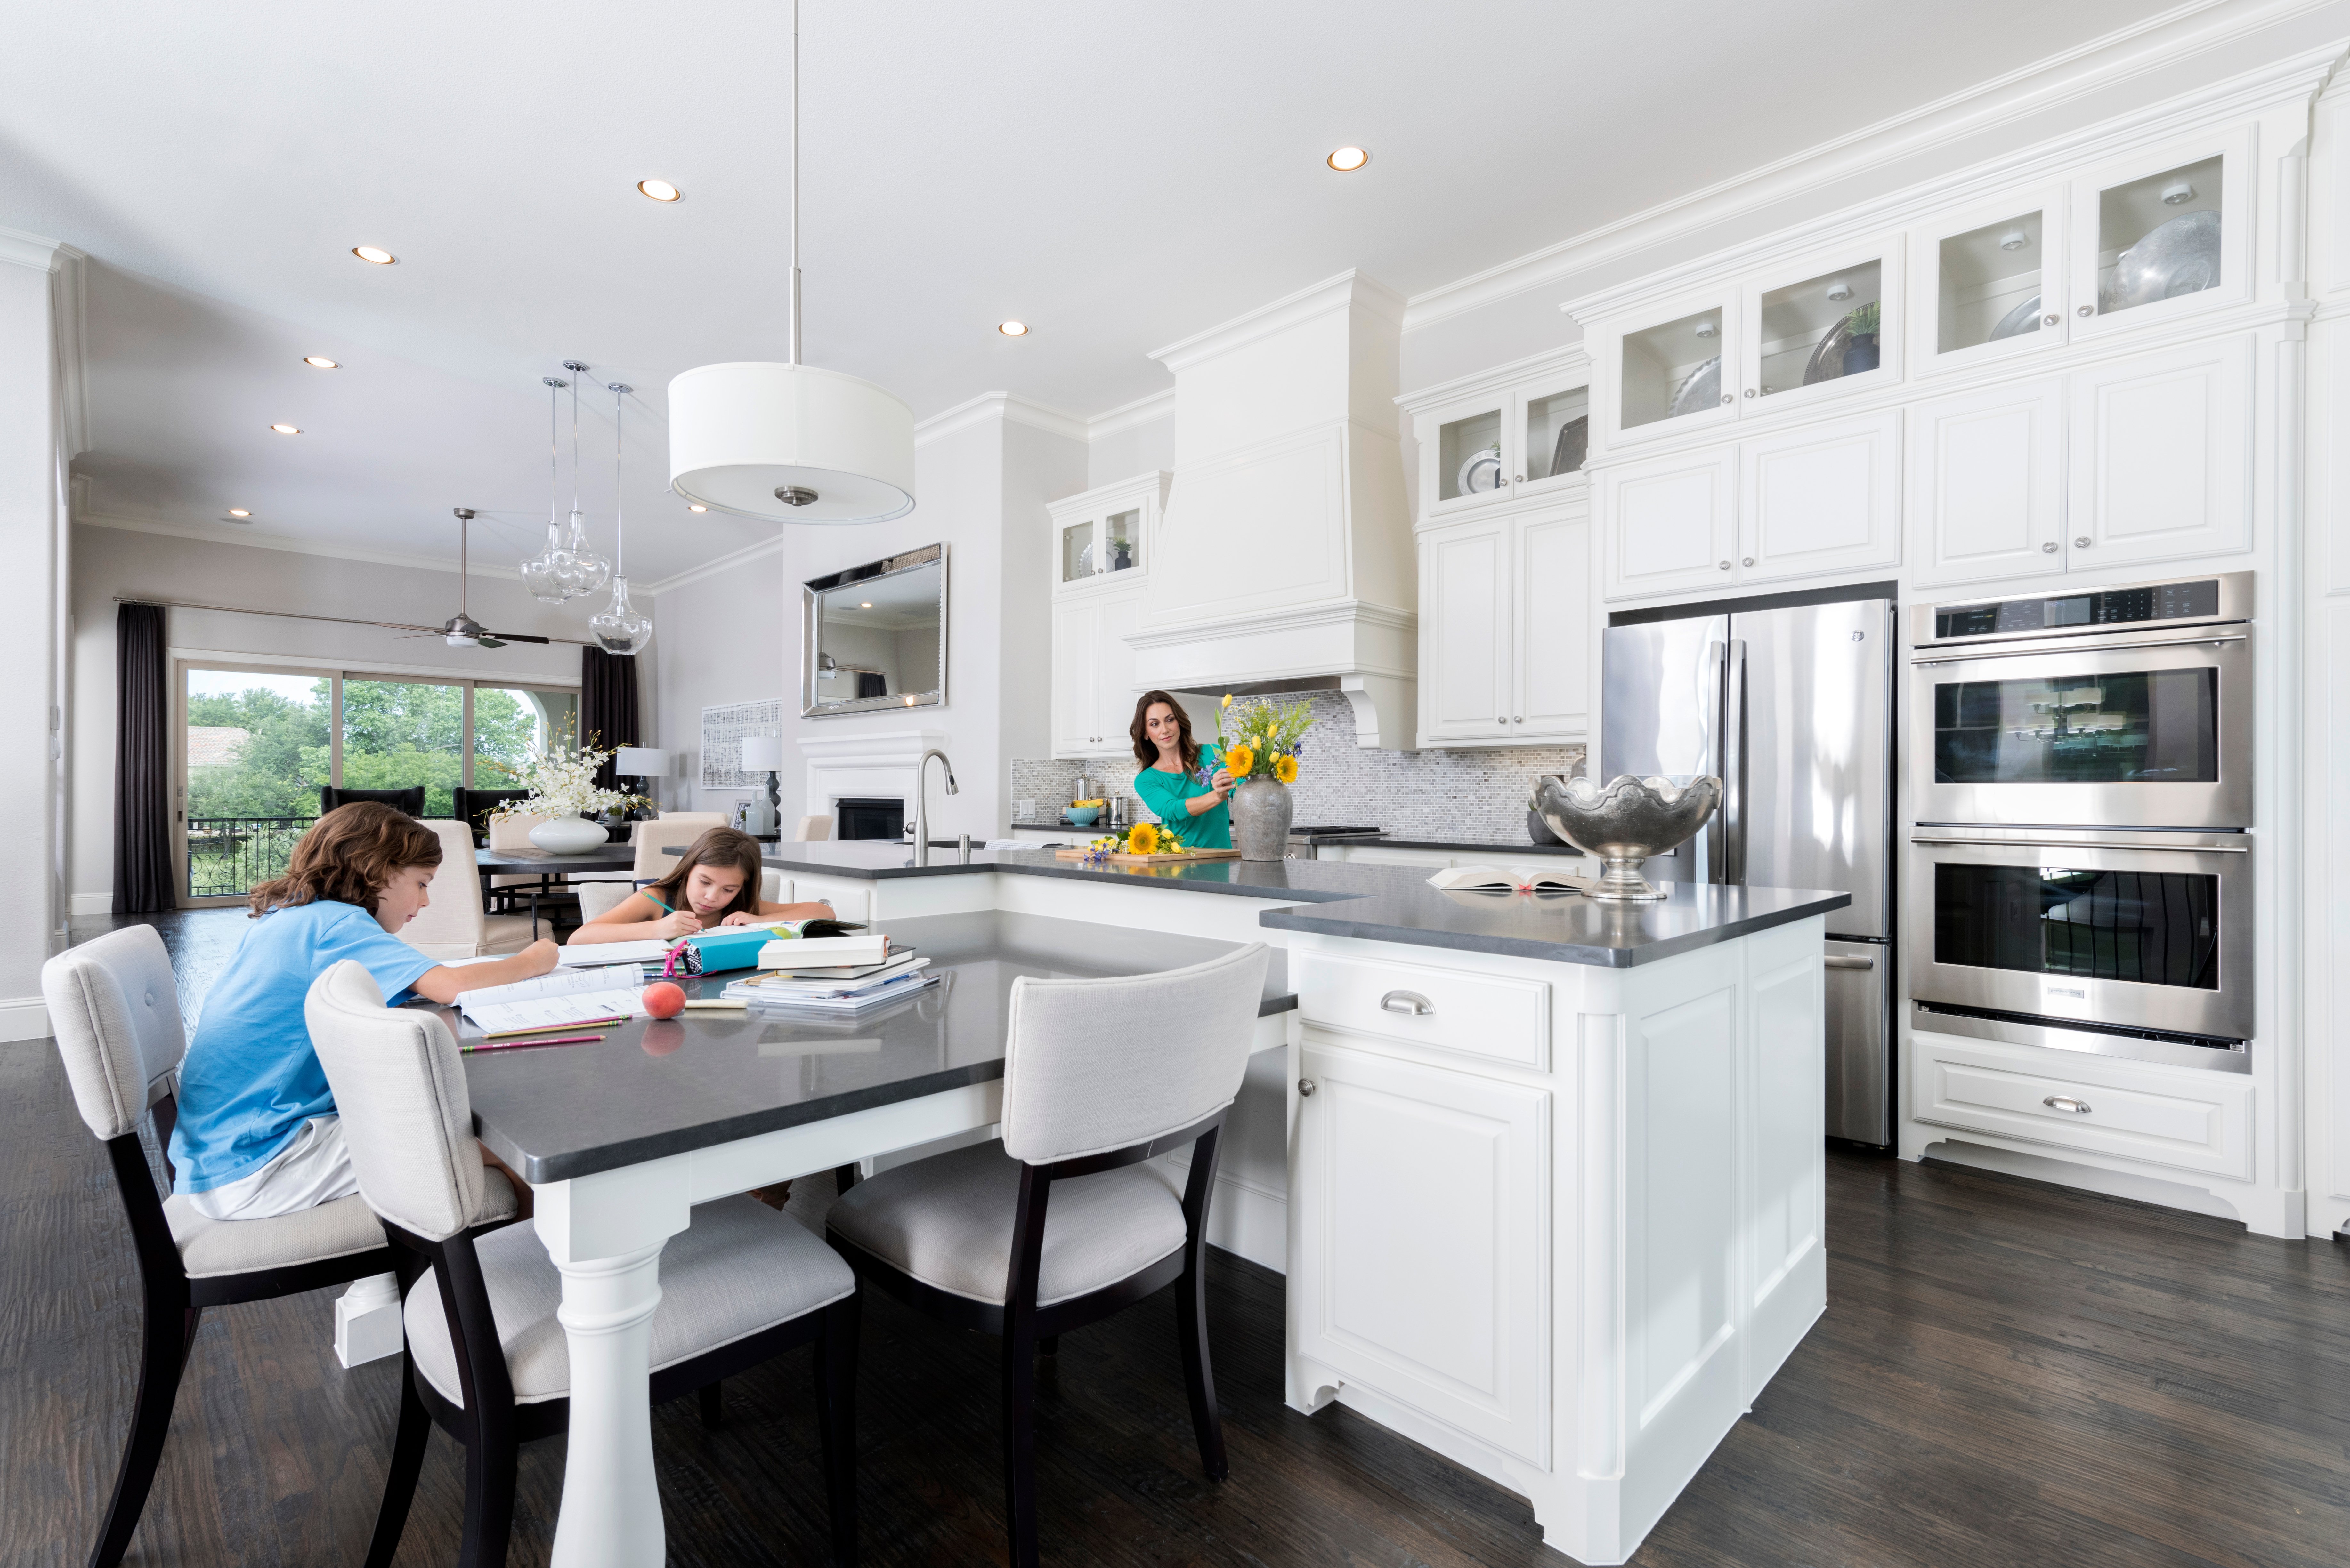 A spacious open-plan kitchen is the perfect setup for mom and kids to share homework time together.